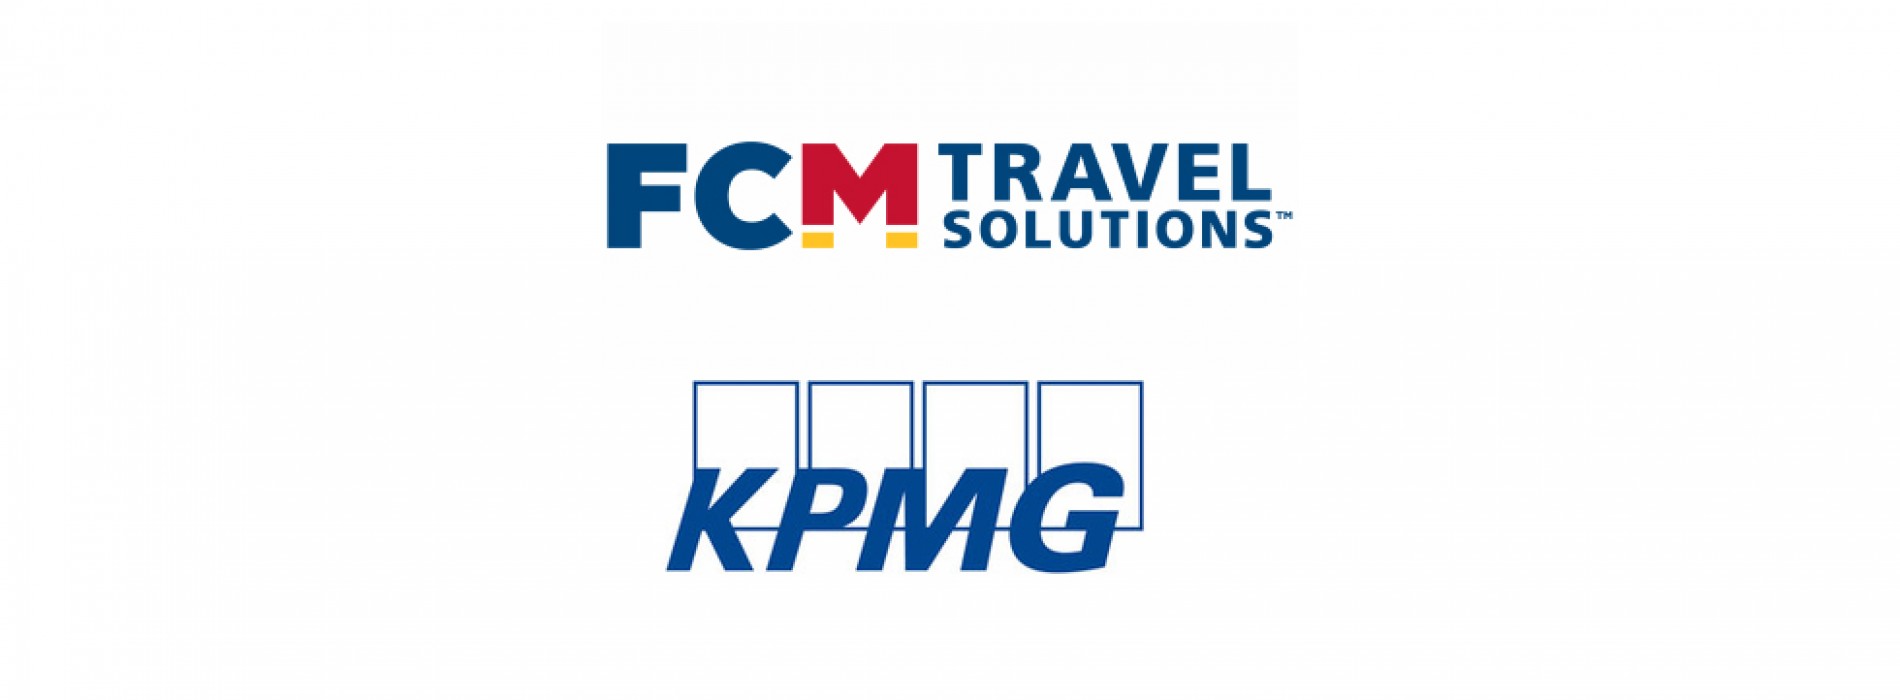 FCM Travel Solutions and KPMG release white paper on business travel in India